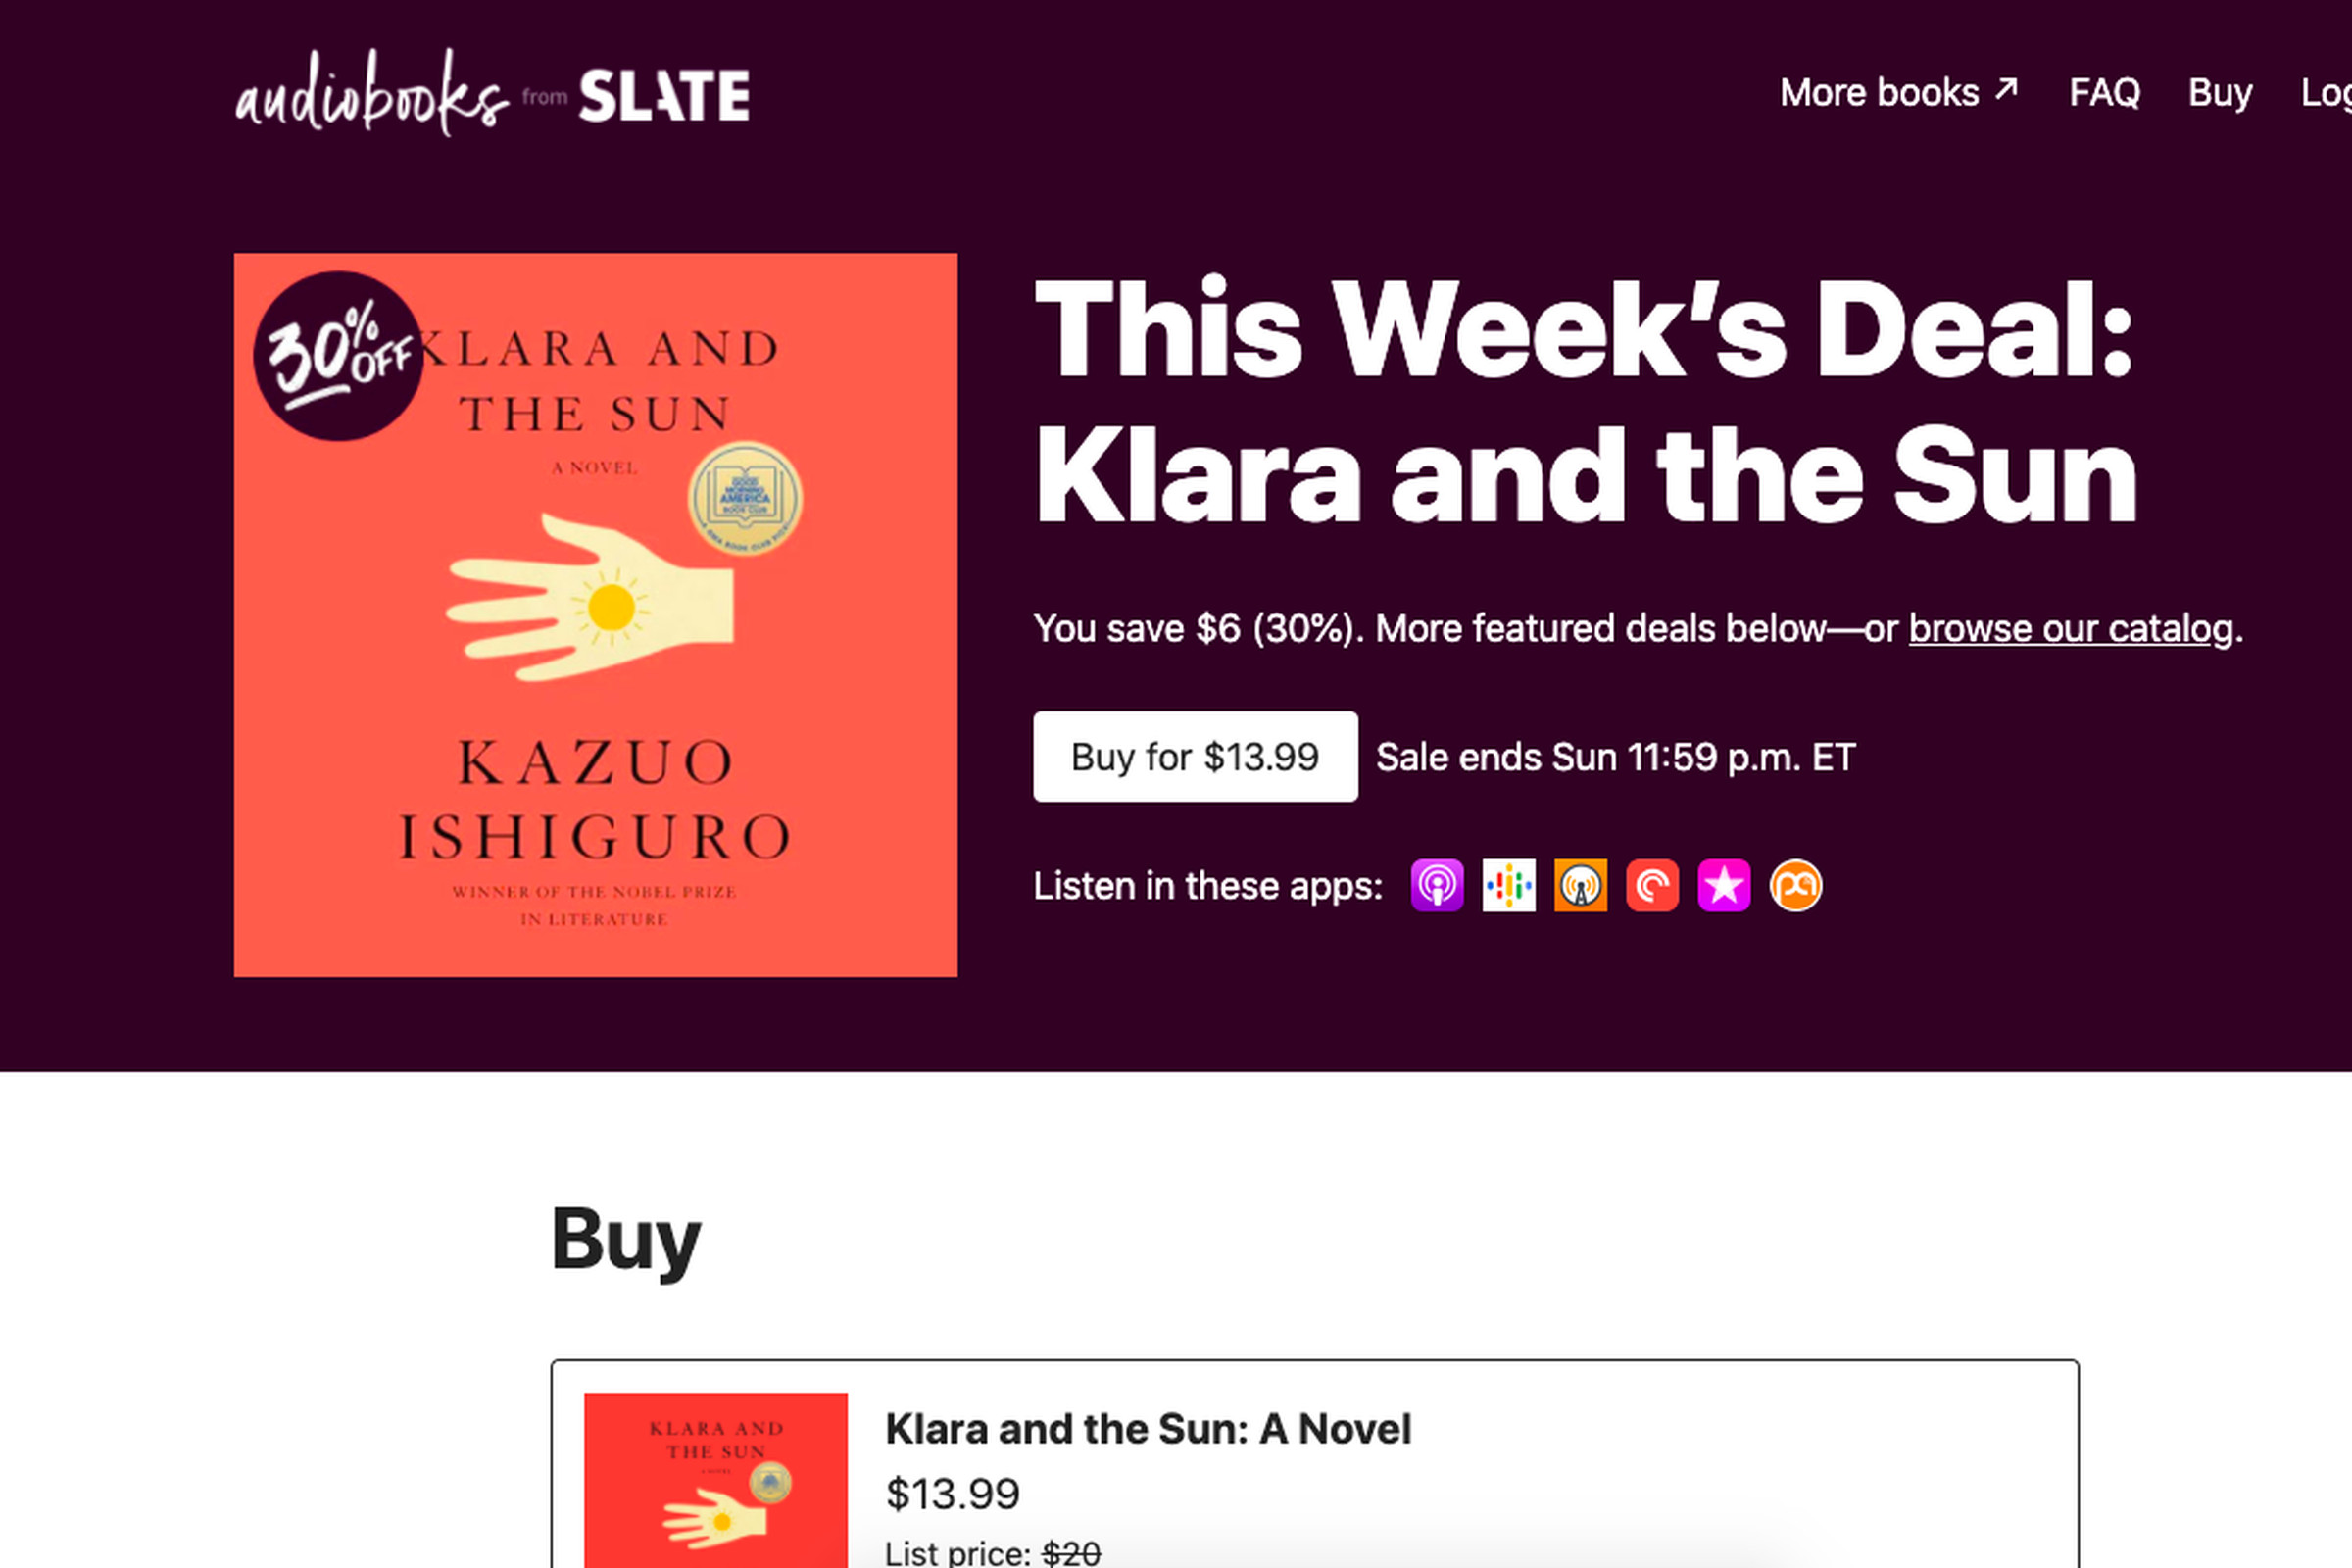 Slate is now selling audiobooks that can be listened to in the podcasting app of listeners’ choice.